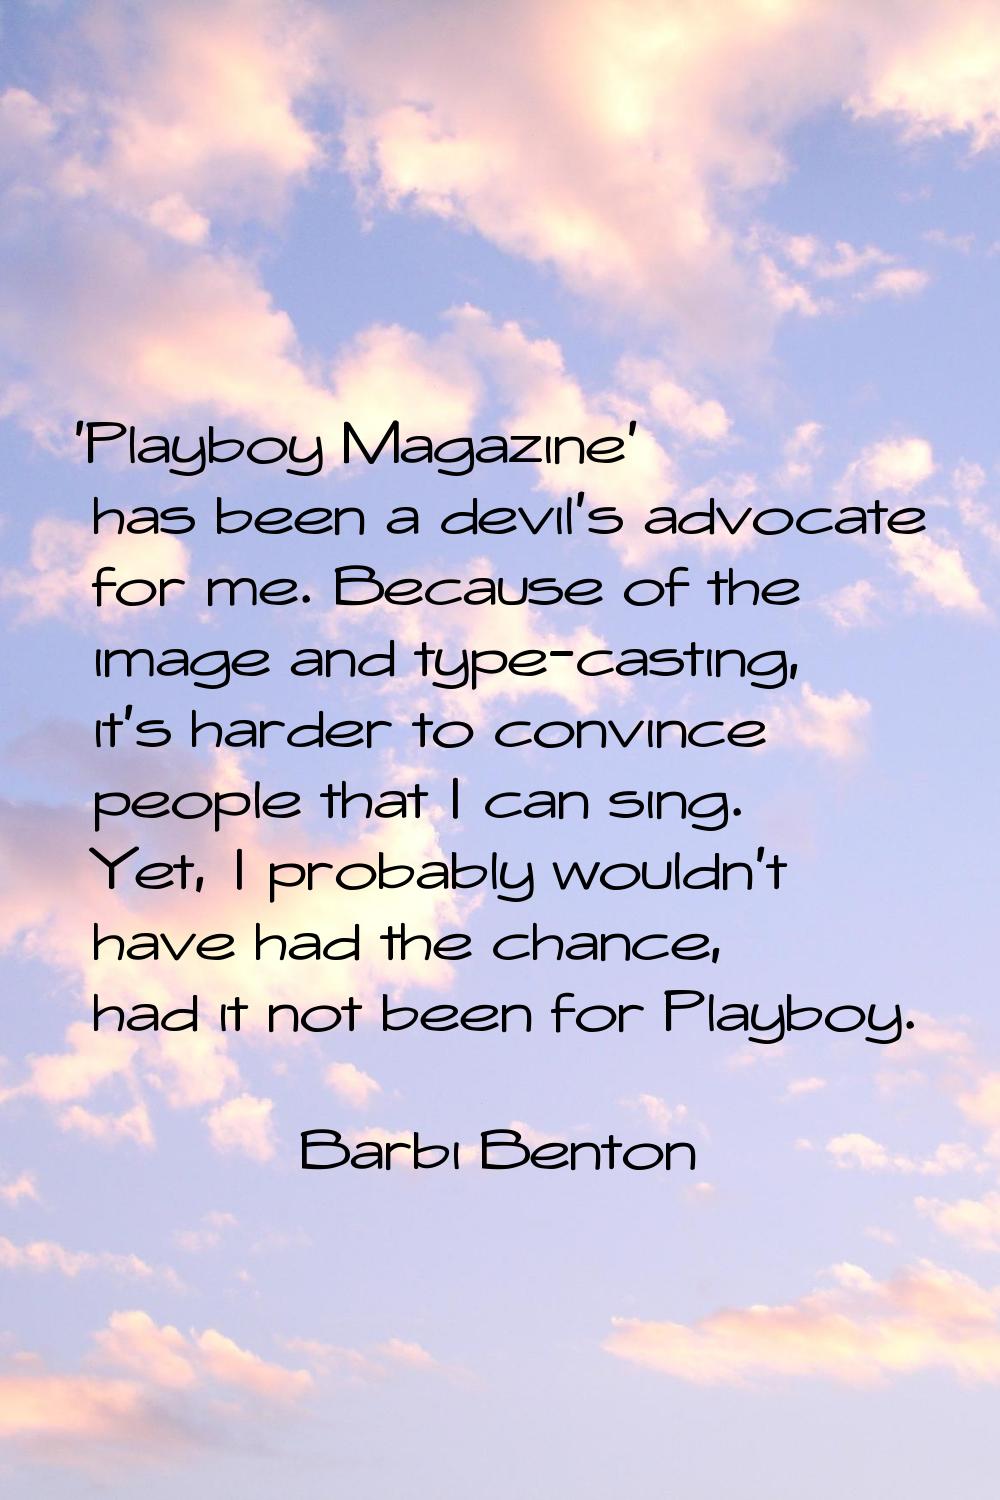 'Playboy Magazine' has been a devil's advocate for me. Because of the image and type-casting, it's 